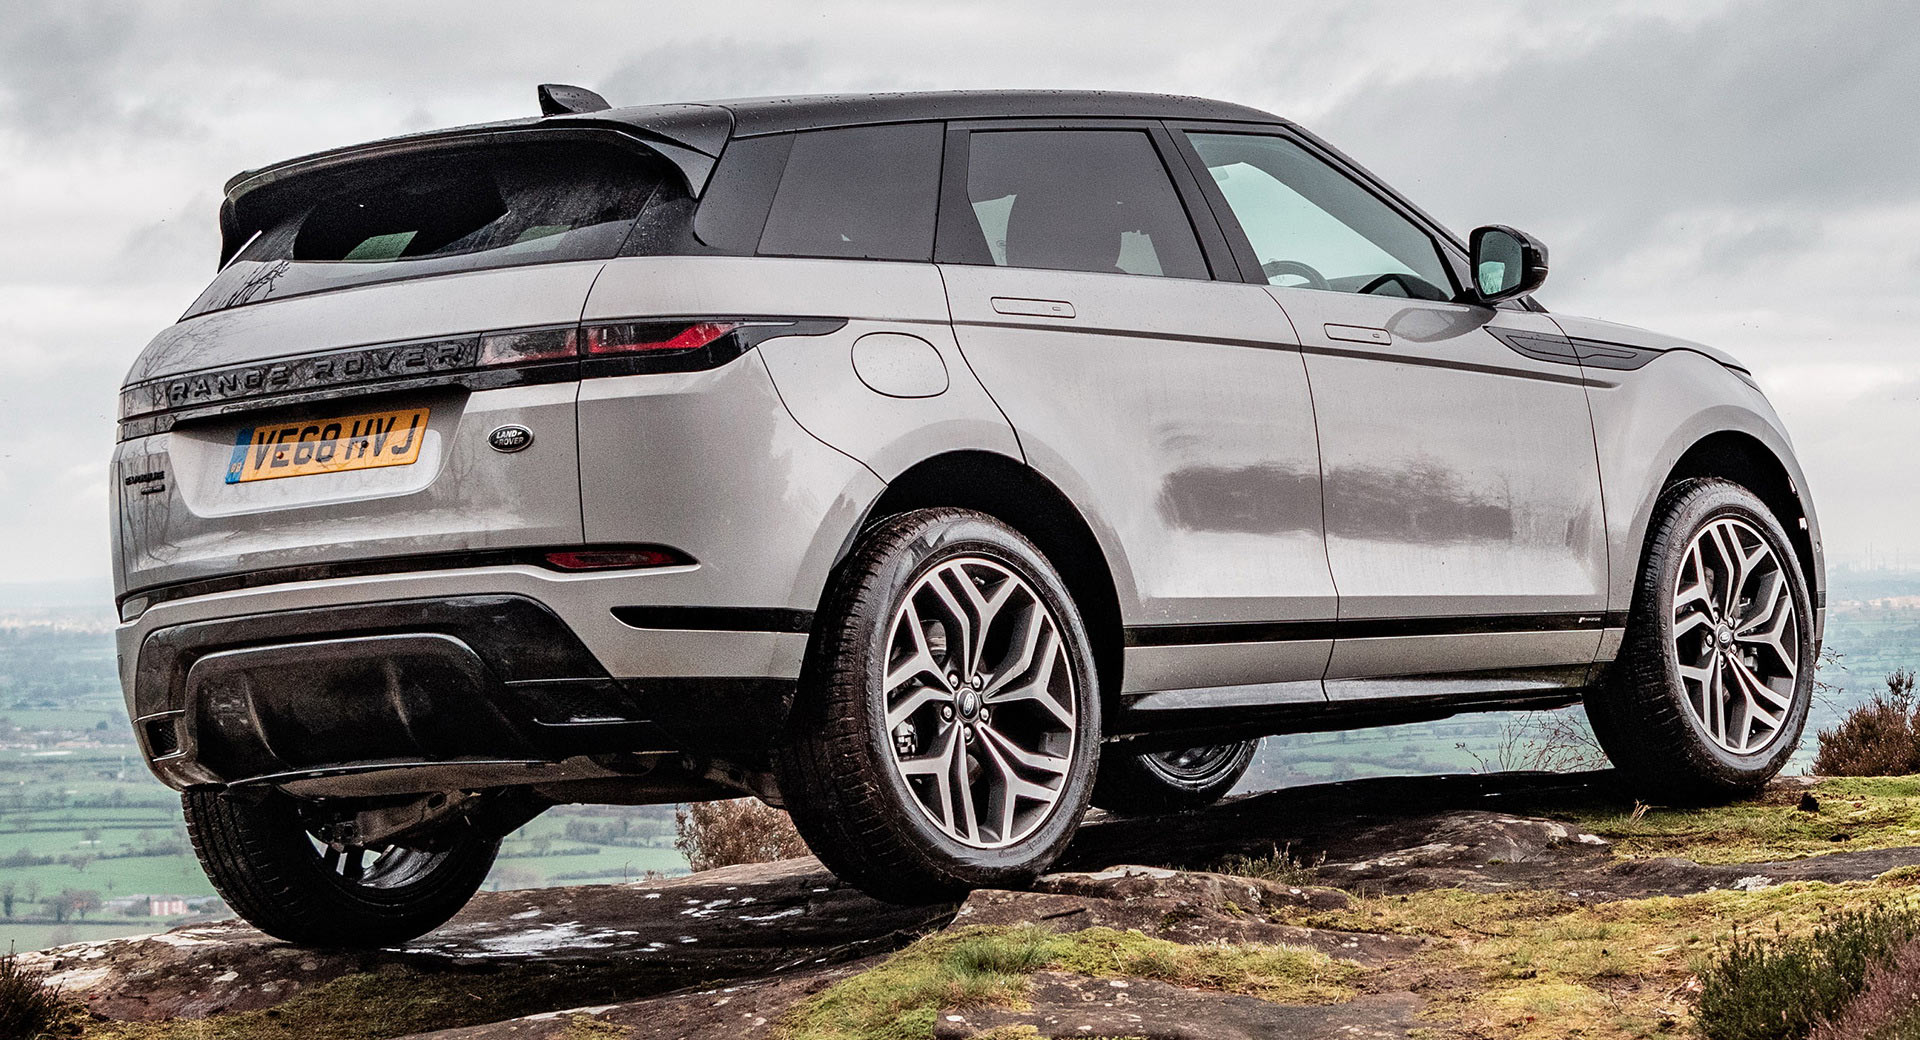 Range Rover Evoque Is The First Premium Compact SUV To